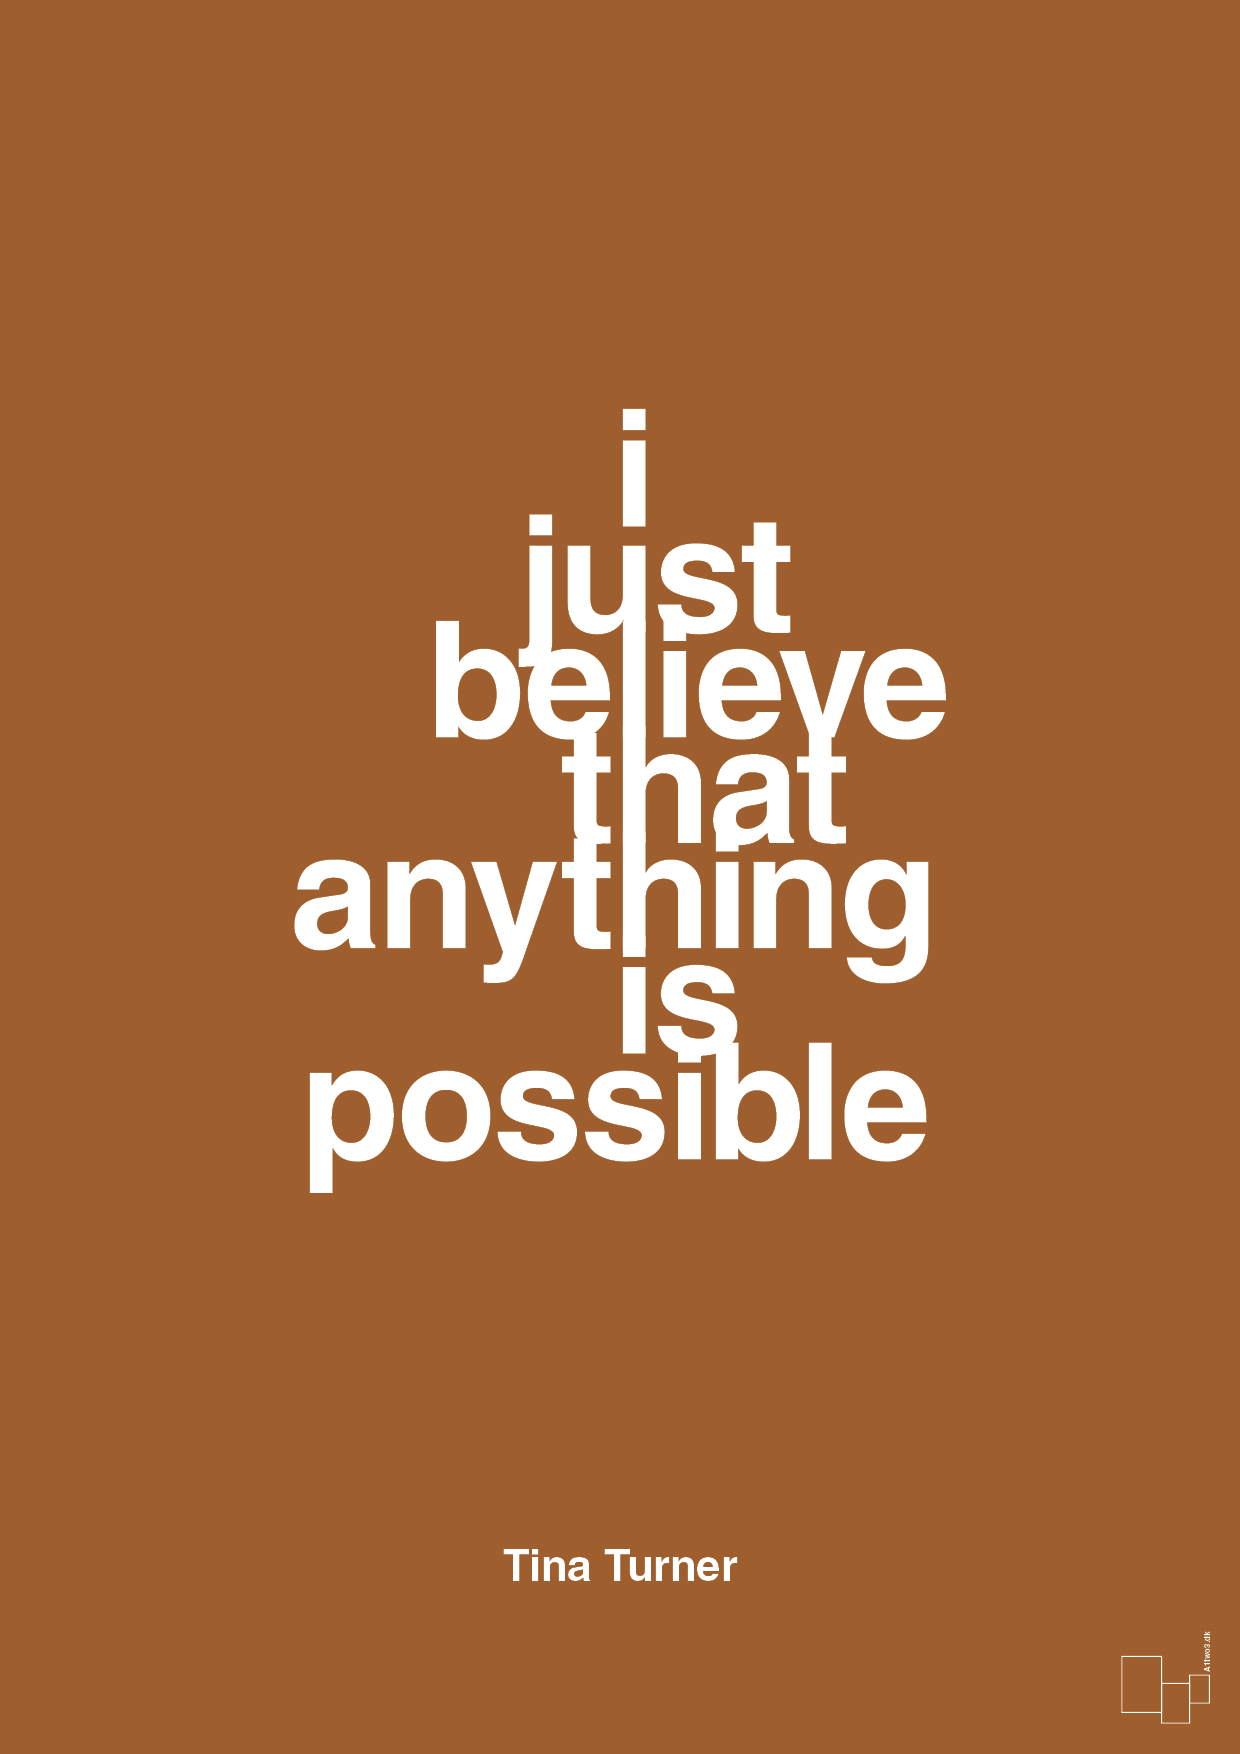 i just believe that anything is possible - Plakat med Citater i Cognac